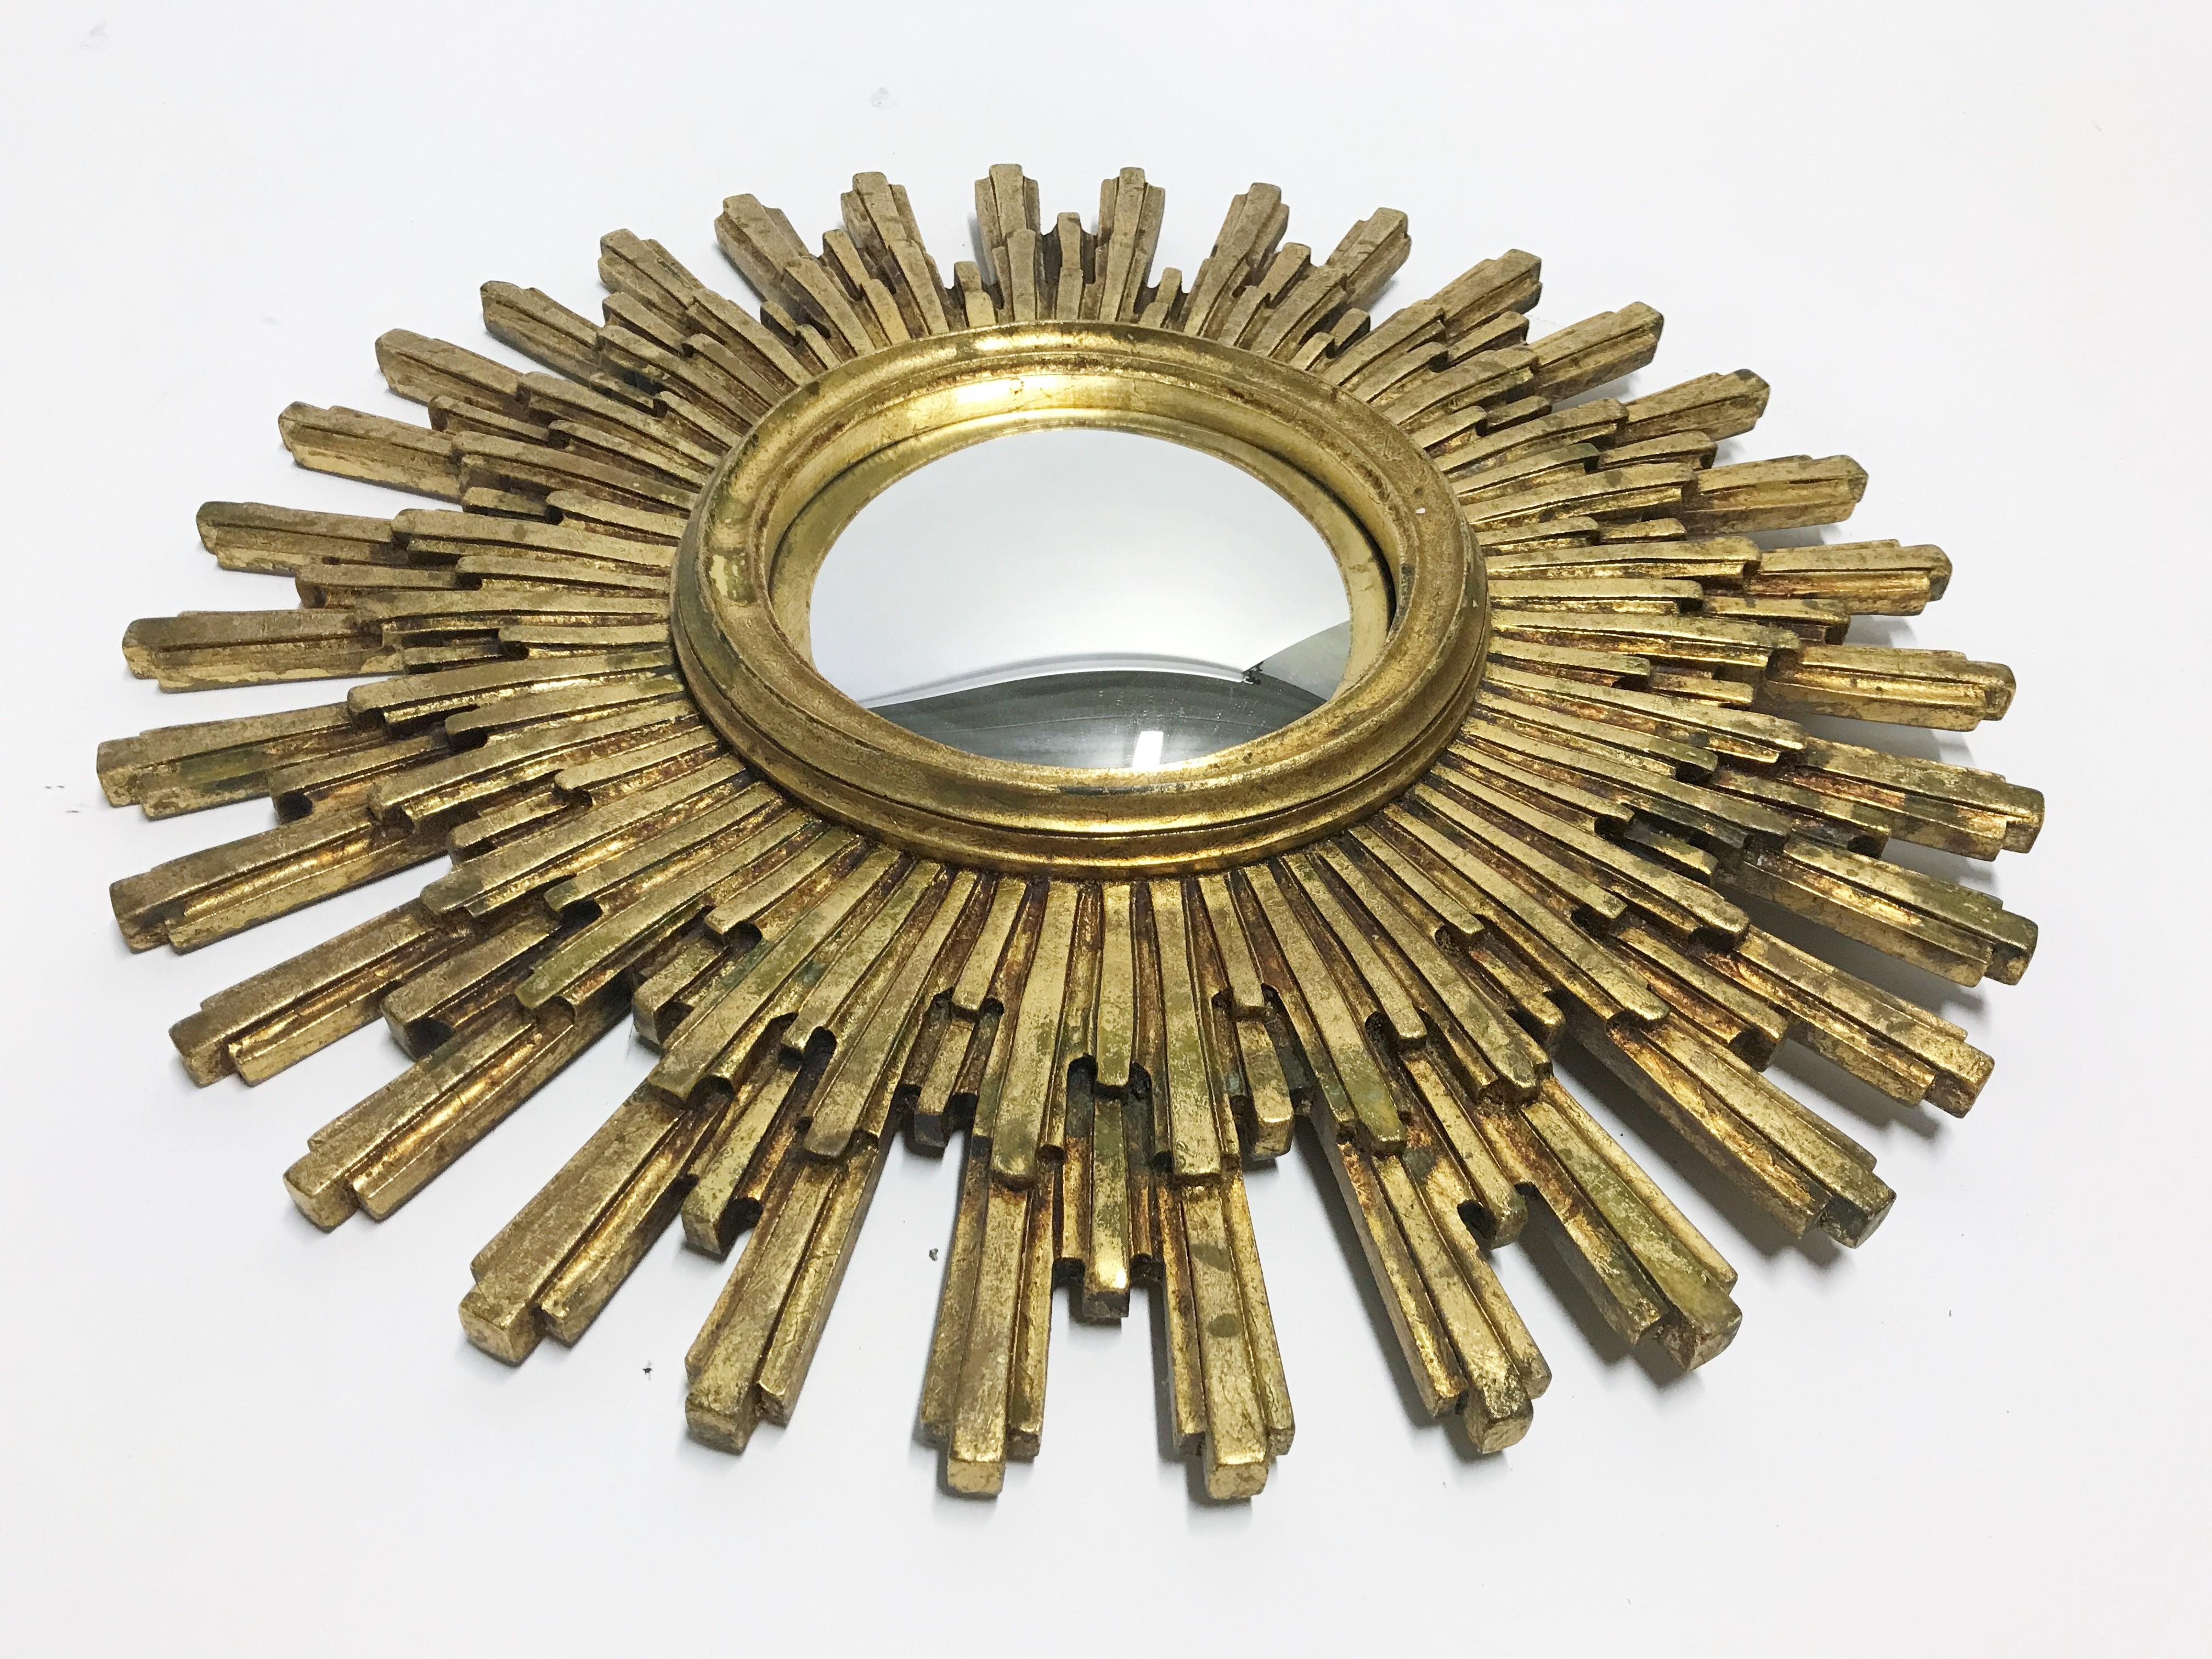 Heavy gilded resin sunburst mirror with convex mirror glass.

The golden mirror is in a very good condition, beautifully patinated.

1960s - made in Belgium.

Dimensions:
Diameter: 55 cm/ 21.6